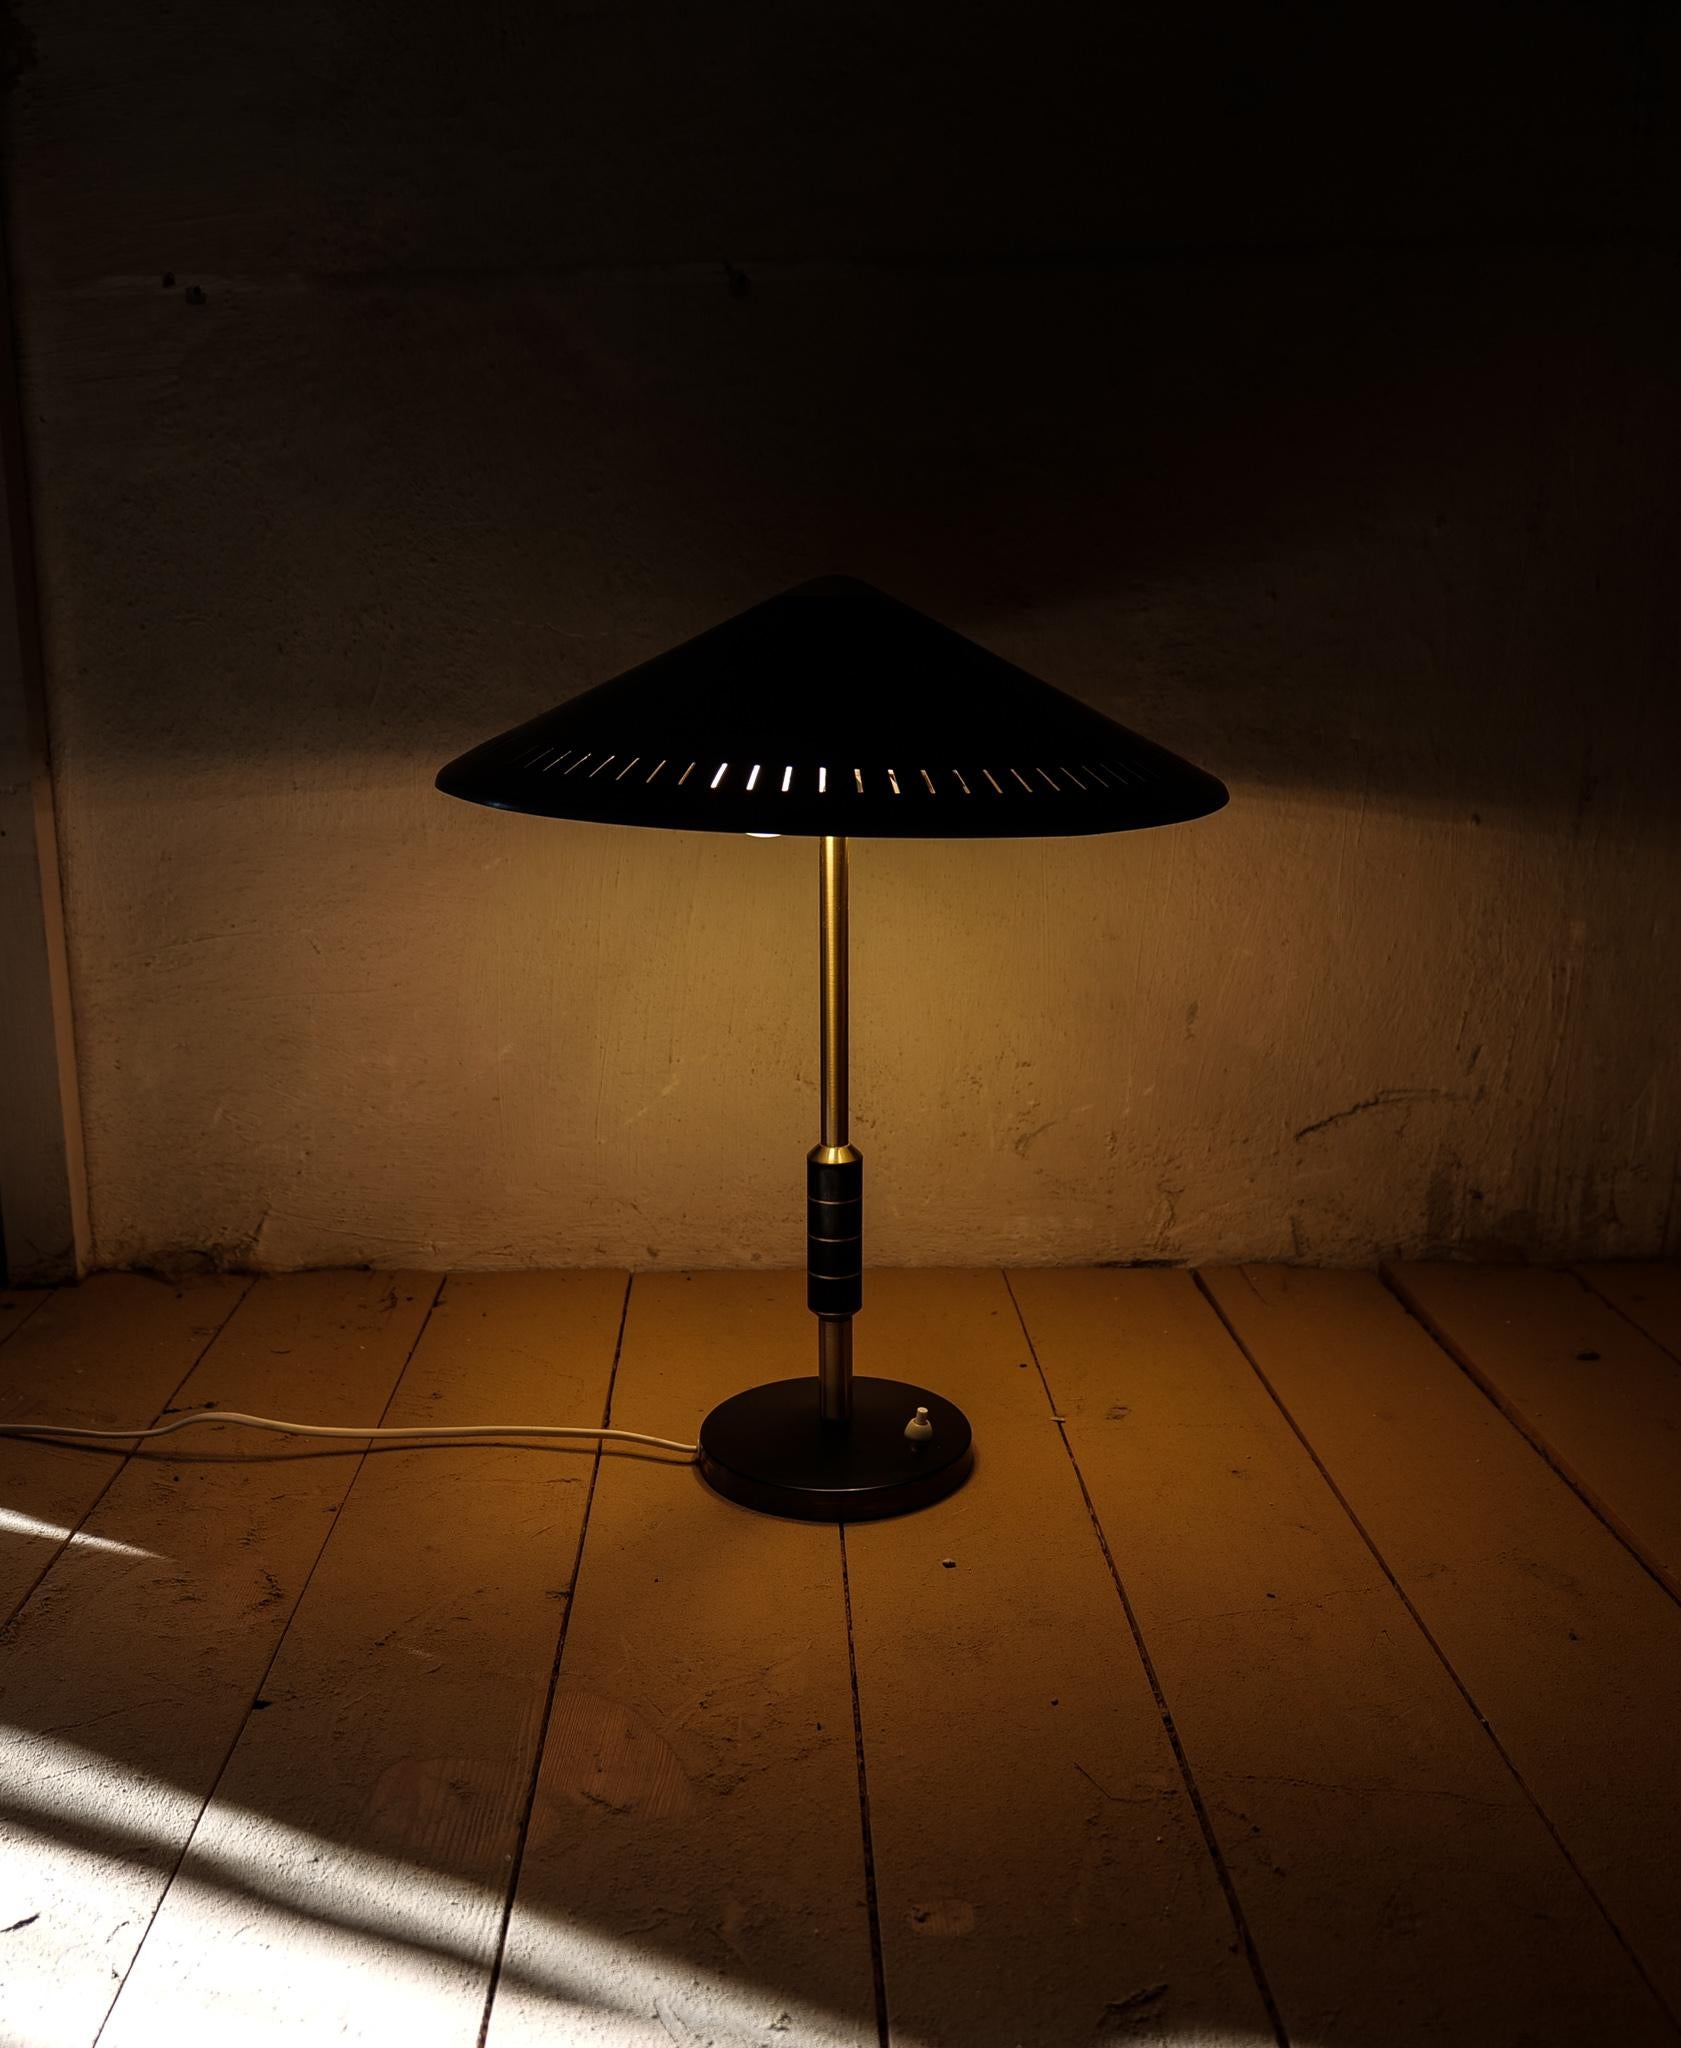 Midcentury Modern Table Lamp by Bent Karlby Produced by Lyfa in Denmark, 1956 For Sale 12